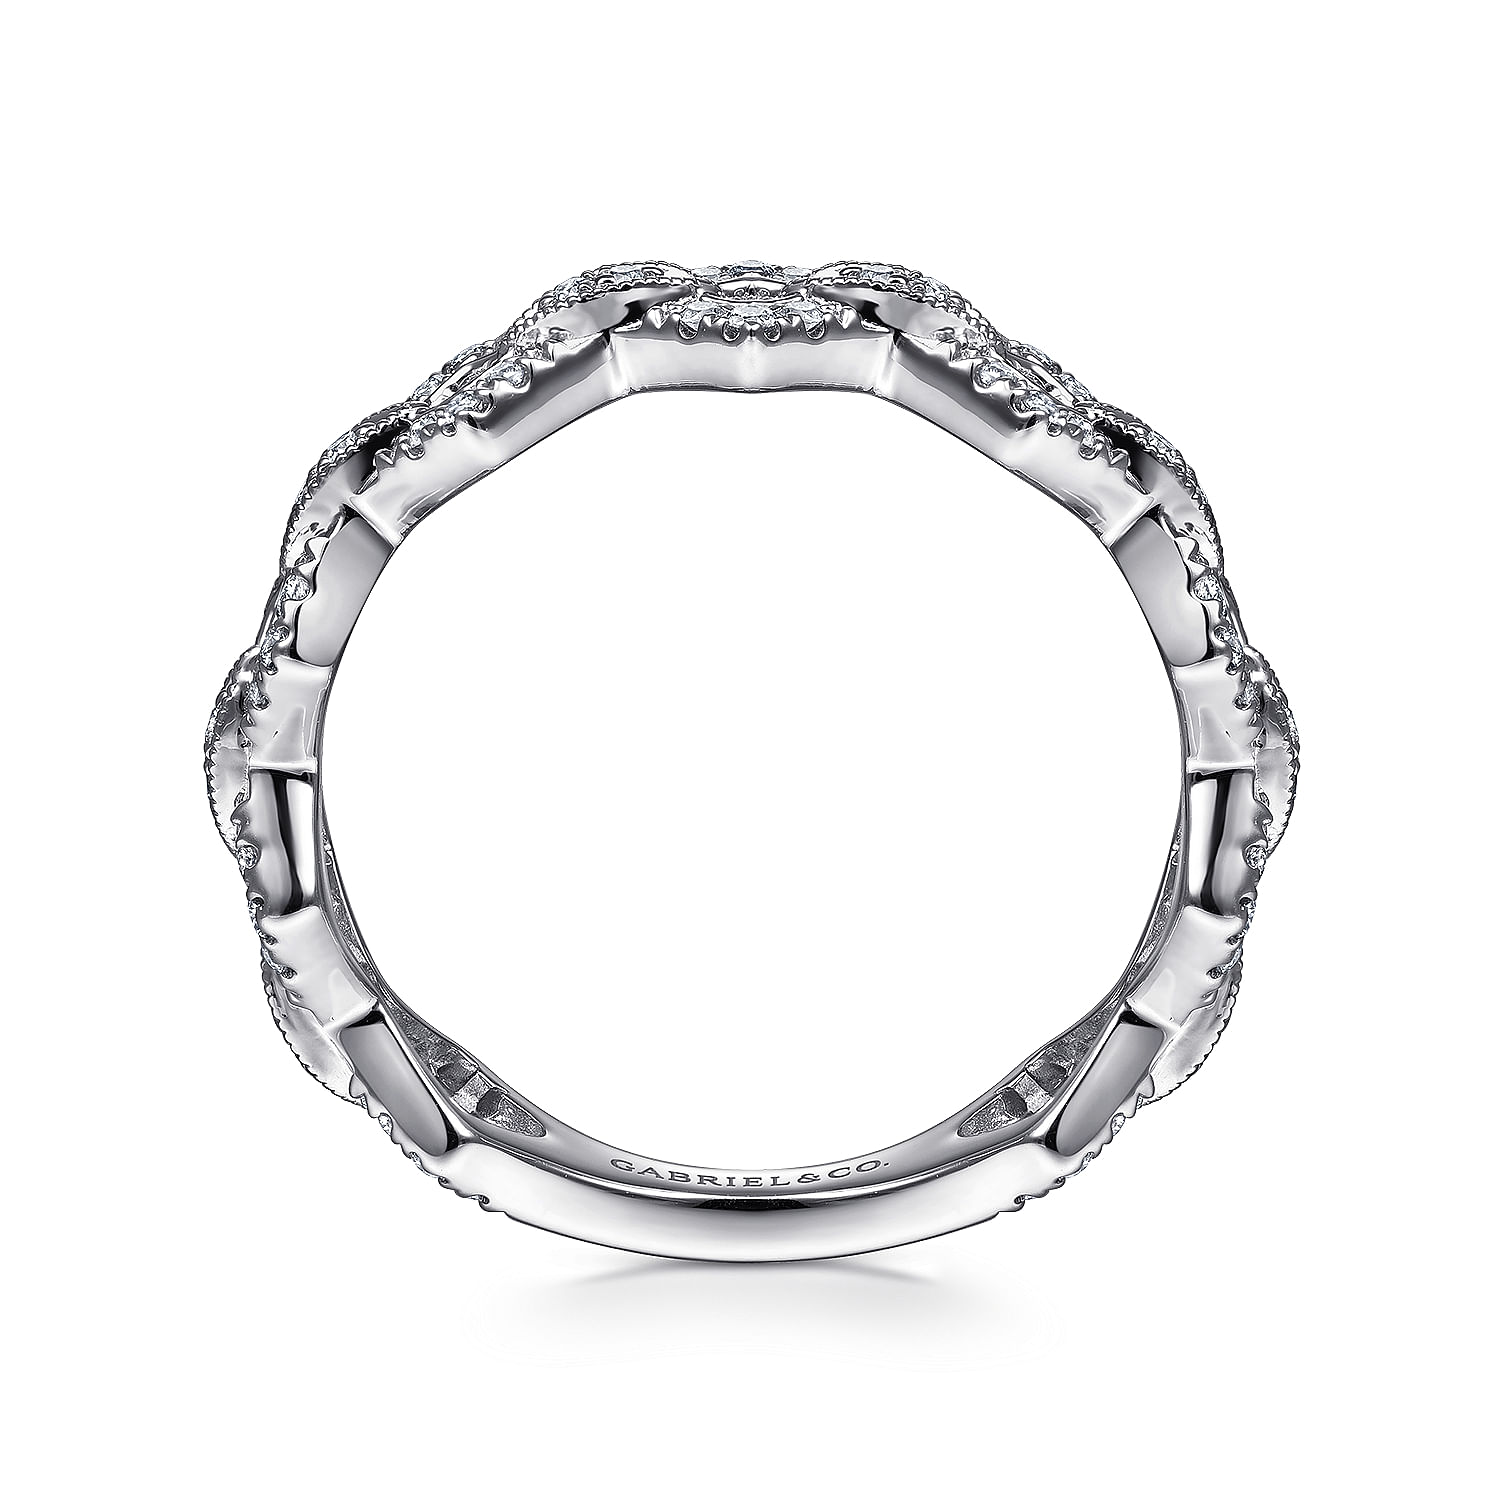 14K White Gold Chain Link Stackable Diamond Ring